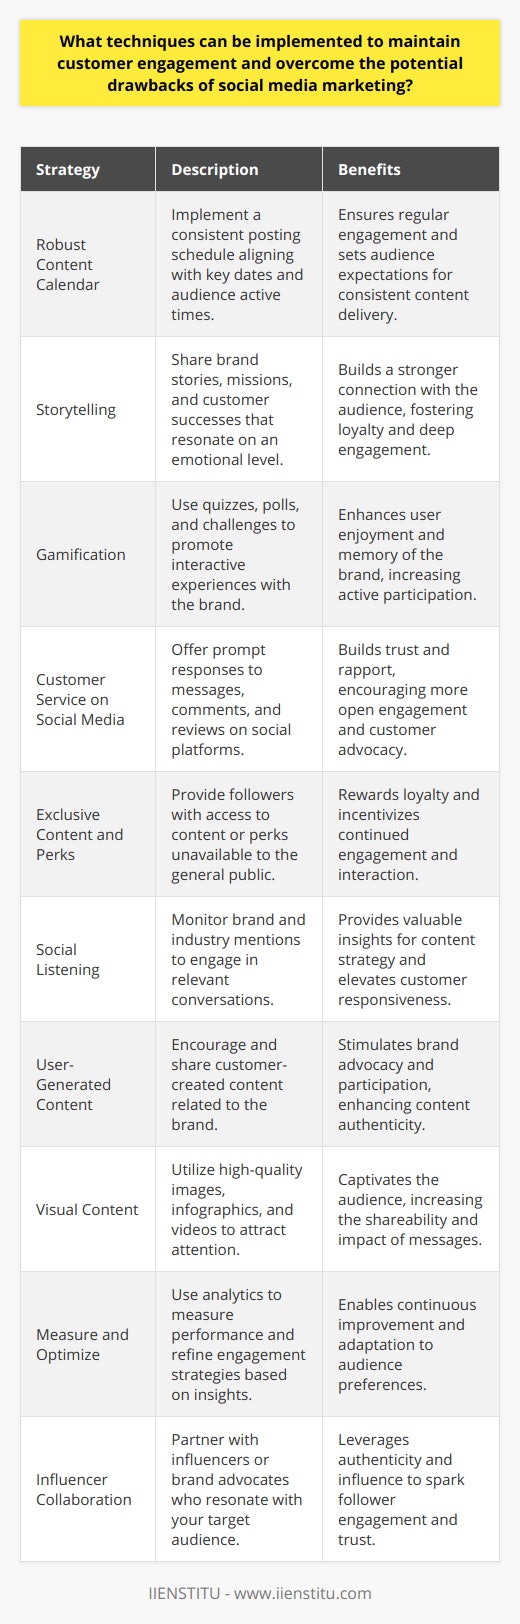 Maintaining customer engagement on social media is imperative for businesses to thrive in a digital ecosystem. To overcome potential drawbacks of social media marketing, companies must implement innovative and strategic techniques that not only capture the attention of their audience but also build a loyal community. Here are some effective strategies for enhancing customer engagement through social media.**Develop a Robust Content Calendar**Creating a consistent posting schedule ensures that your audience receives regular and relevant content. A robust content calendar aligns with key dates, holidays, and the unique timings when your audience is most active. Consistency keeps the audience expecting more, thereby improving engagement.**Leverage Storytelling**People connect with stories more than sales pitches. Share your brand’s mission, behind-the-scenes moments, customer success stories, and other narratives that resonate with your audience. Effective storytelling can evoke emotions and foster a stronger connection, driving engagement and loyalty.**Promote Interaction through Gamification**Gamification involves incorporating game elements into non-game environments, like social media. Techniques such as quizzes, polls, and challenges can encourage users to interact with your brand. This enhances engagement by making the experience enjoyable and memorable.**Prioritize Customer Service on Social Channels**Use social platforms as a medium for excellent customer service. Respond promptly to messages, comments, and reviews, even if they're negative. Showing that you listen and care builds rapport, trust, and encourages customers to engage more openly with your brand.**Offer Exclusive Content and Perks**Give your social media followers exclusive content or perks that they wouldn’t get elsewhere. This could include early access to products, special discounts, or insider information. It rewards their loyalty and incentivizes them to stay engaged with your social media presence.**Adopt a Social Listening Strategy**Monitor mentions of your brand, products, and industry-related keywords. Respond to any conversation around your brand, and use insights derived from social listening to improve your content and engagement strategies.**Target User-Generated Content**Encouraging users to create content for your brand increases engagement by valuing customer input. Share their photos, reviews, or experiences with your products. Recognizing customers’ contributions can stimulate further participation and endorsement.**Harness the Power of Visual Content**Visuals, such as high-quality images, infographics, and videos, are more engaging than text-only posts. These elements can express complex messages simply and attractively, leading to increased sharing and engagement.**Measure, Analyze, and Optimize**Utilize analytical tools to measure performance and gather insights. Understanding what resonates with your audience can help optimize future content and strategies. It's a continuous improvement cycle that can significantly enhance engagement.**Collaborate with Influencers or Brand Advocates**Partner with influencers or brand advocates whose followers align with your target audience. Their endorsement can lend authenticity to your products and services, prompting their followers to engage with your brand.In implementing these techniques, businesses should strive for authenticity, creativity, and responsiveness. Maintaining customer engagement is not solely about increasing numbers but about cultivating a community that values your brand. By prioritizing genuine connections and delivering value, businesses can effectively leverage social media to engage with customers in a meaningful way.